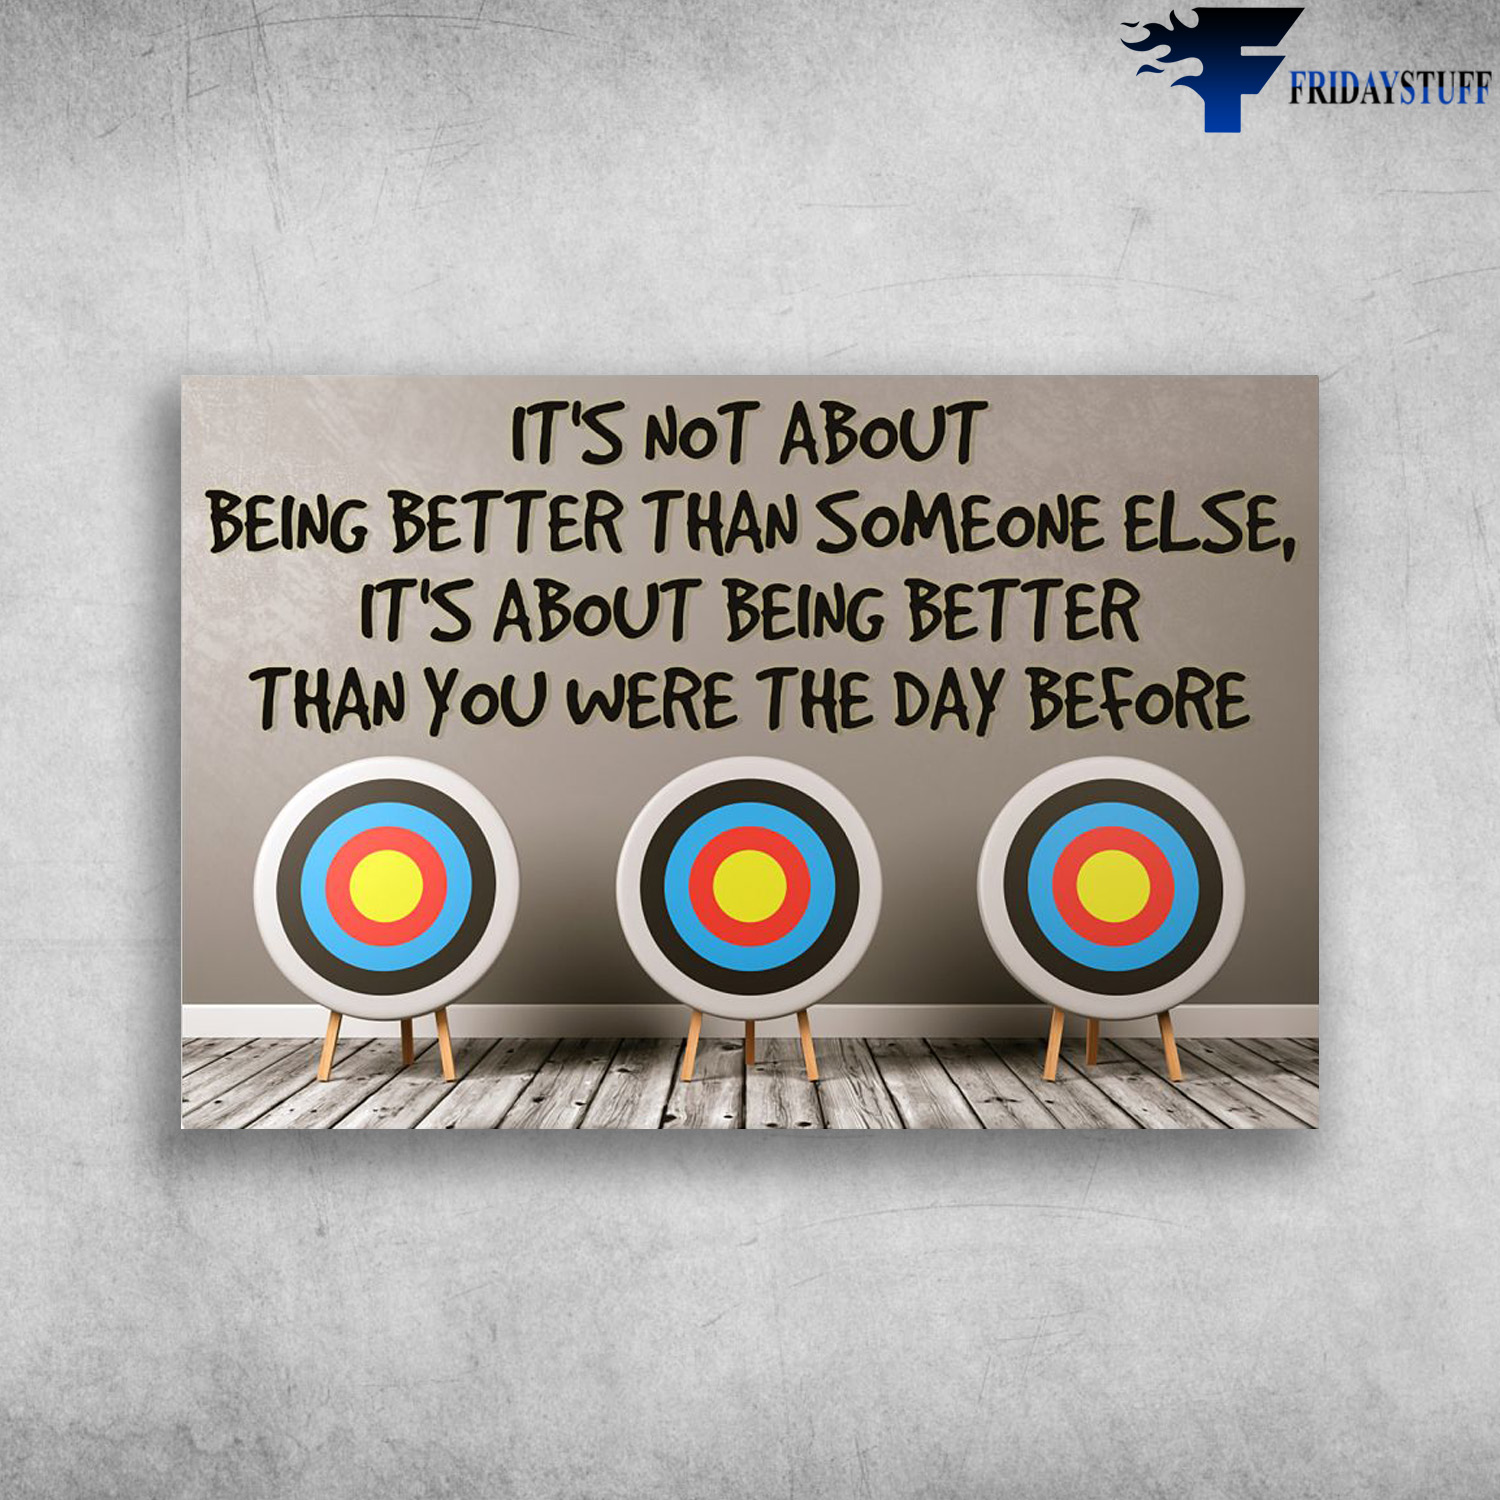 Archery Archers - It's Not About Being Better Than Someone Else, It's About Beinf Better Than You Were The Day Before